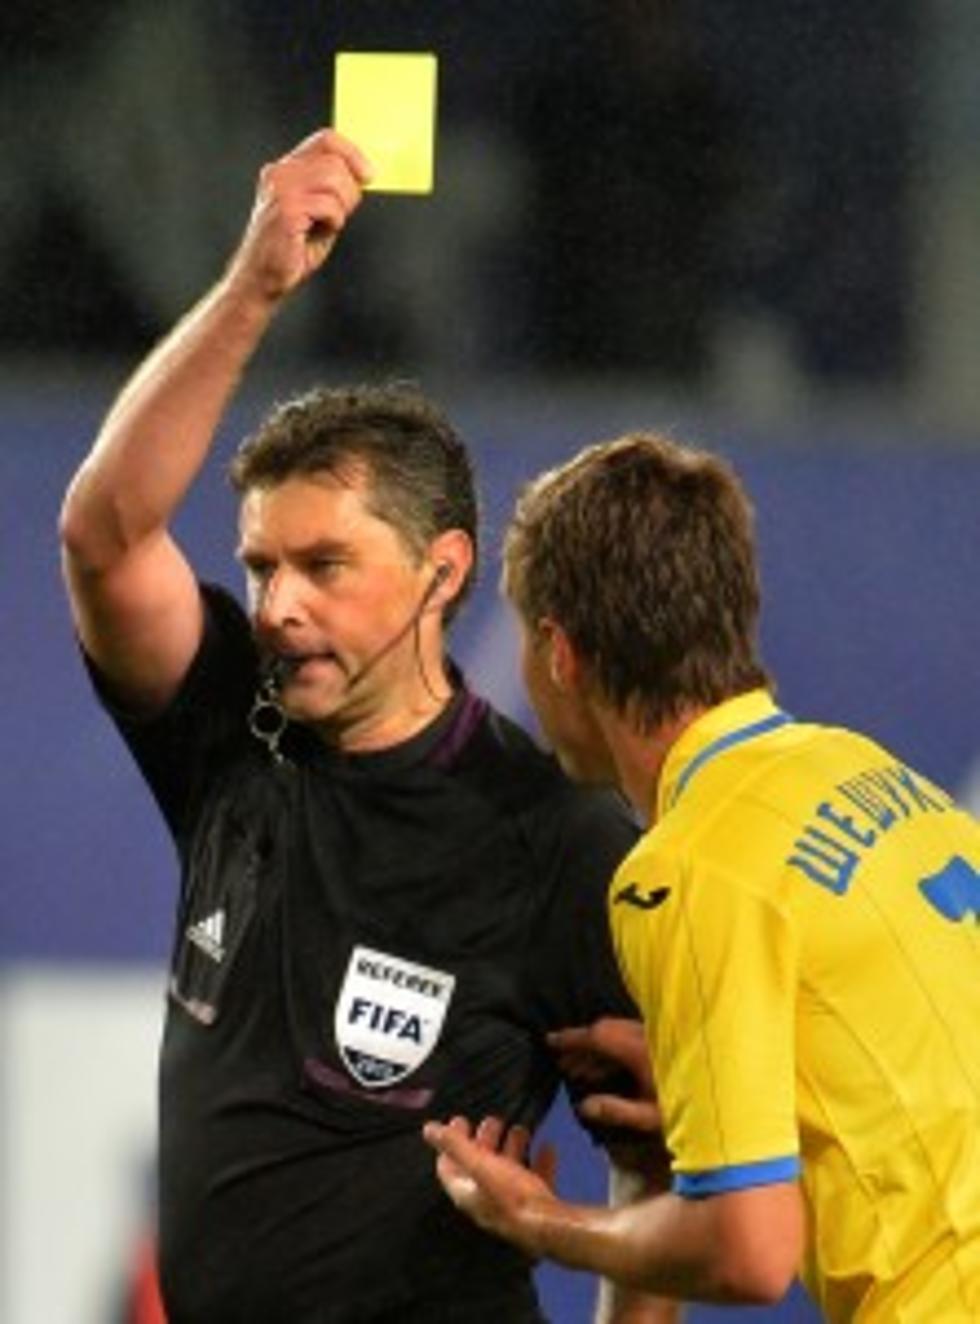 Soccer Ref Fears Pressure Could Lead to Suicide